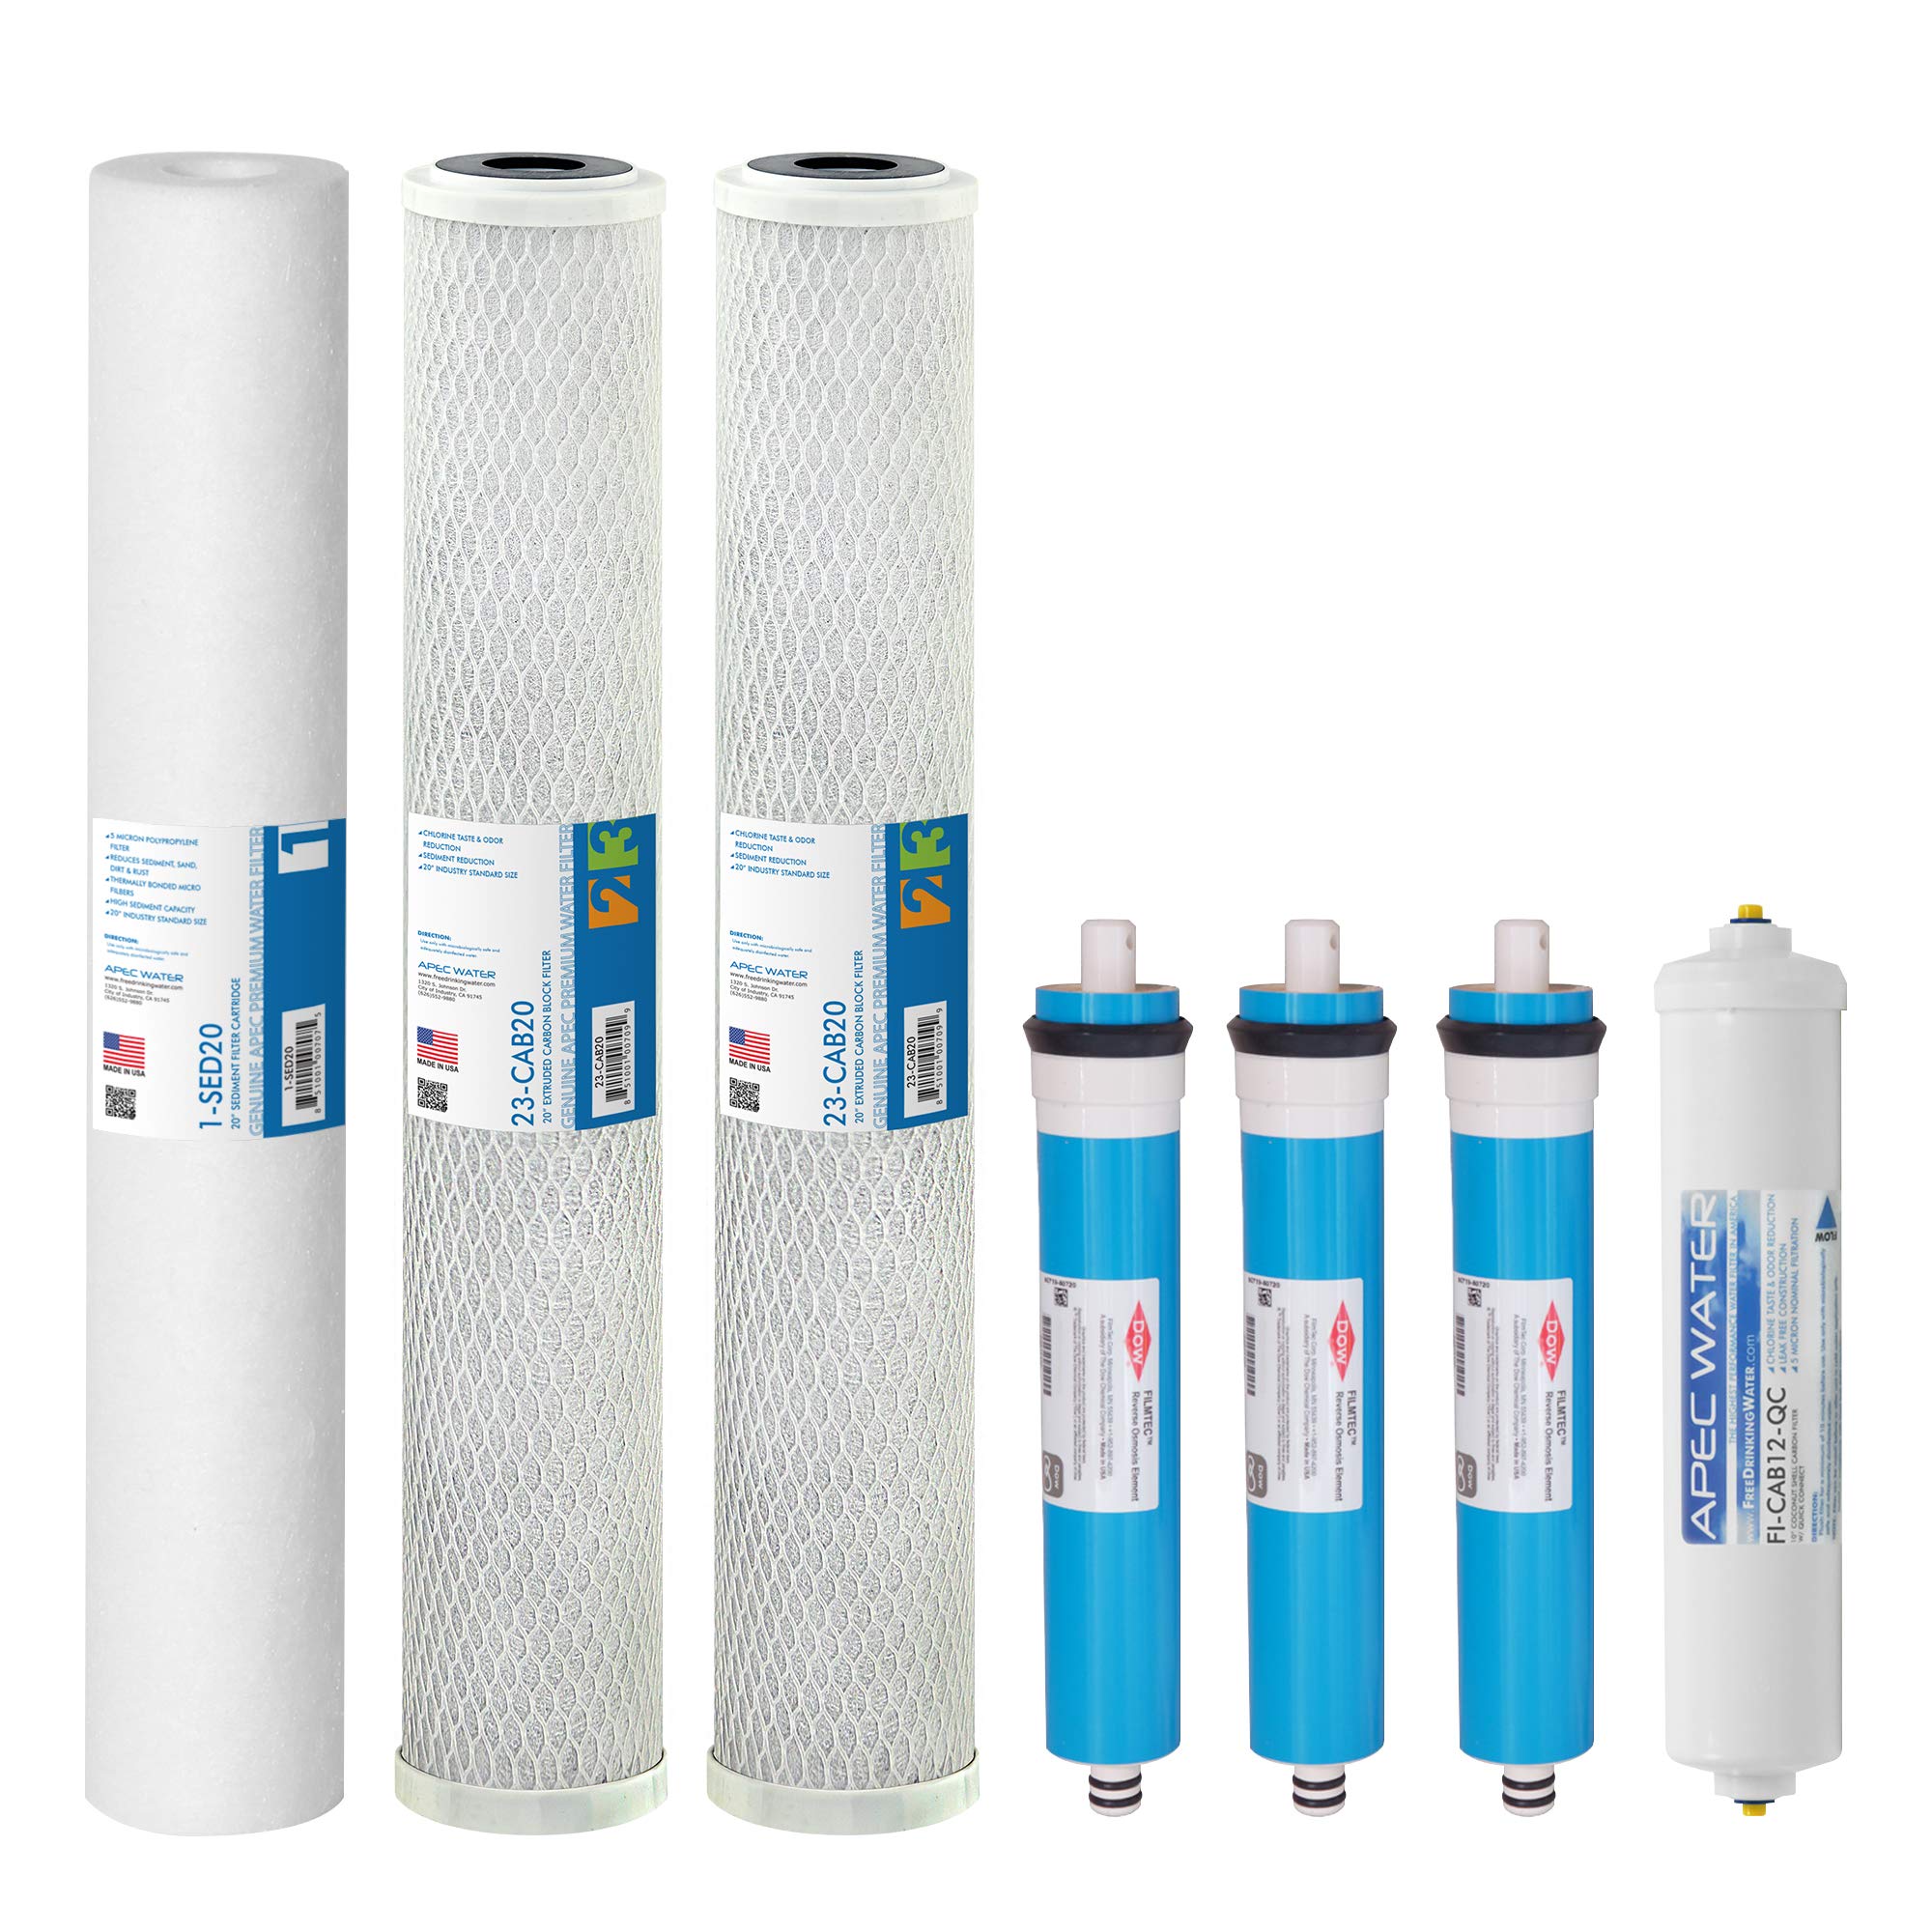 APEC FILTER-MAX-LITE240 Commercial Grade US Made 240 GPD Complete Replacement Filter Set for Light Commercial Reverse Osmosis Water Filter System